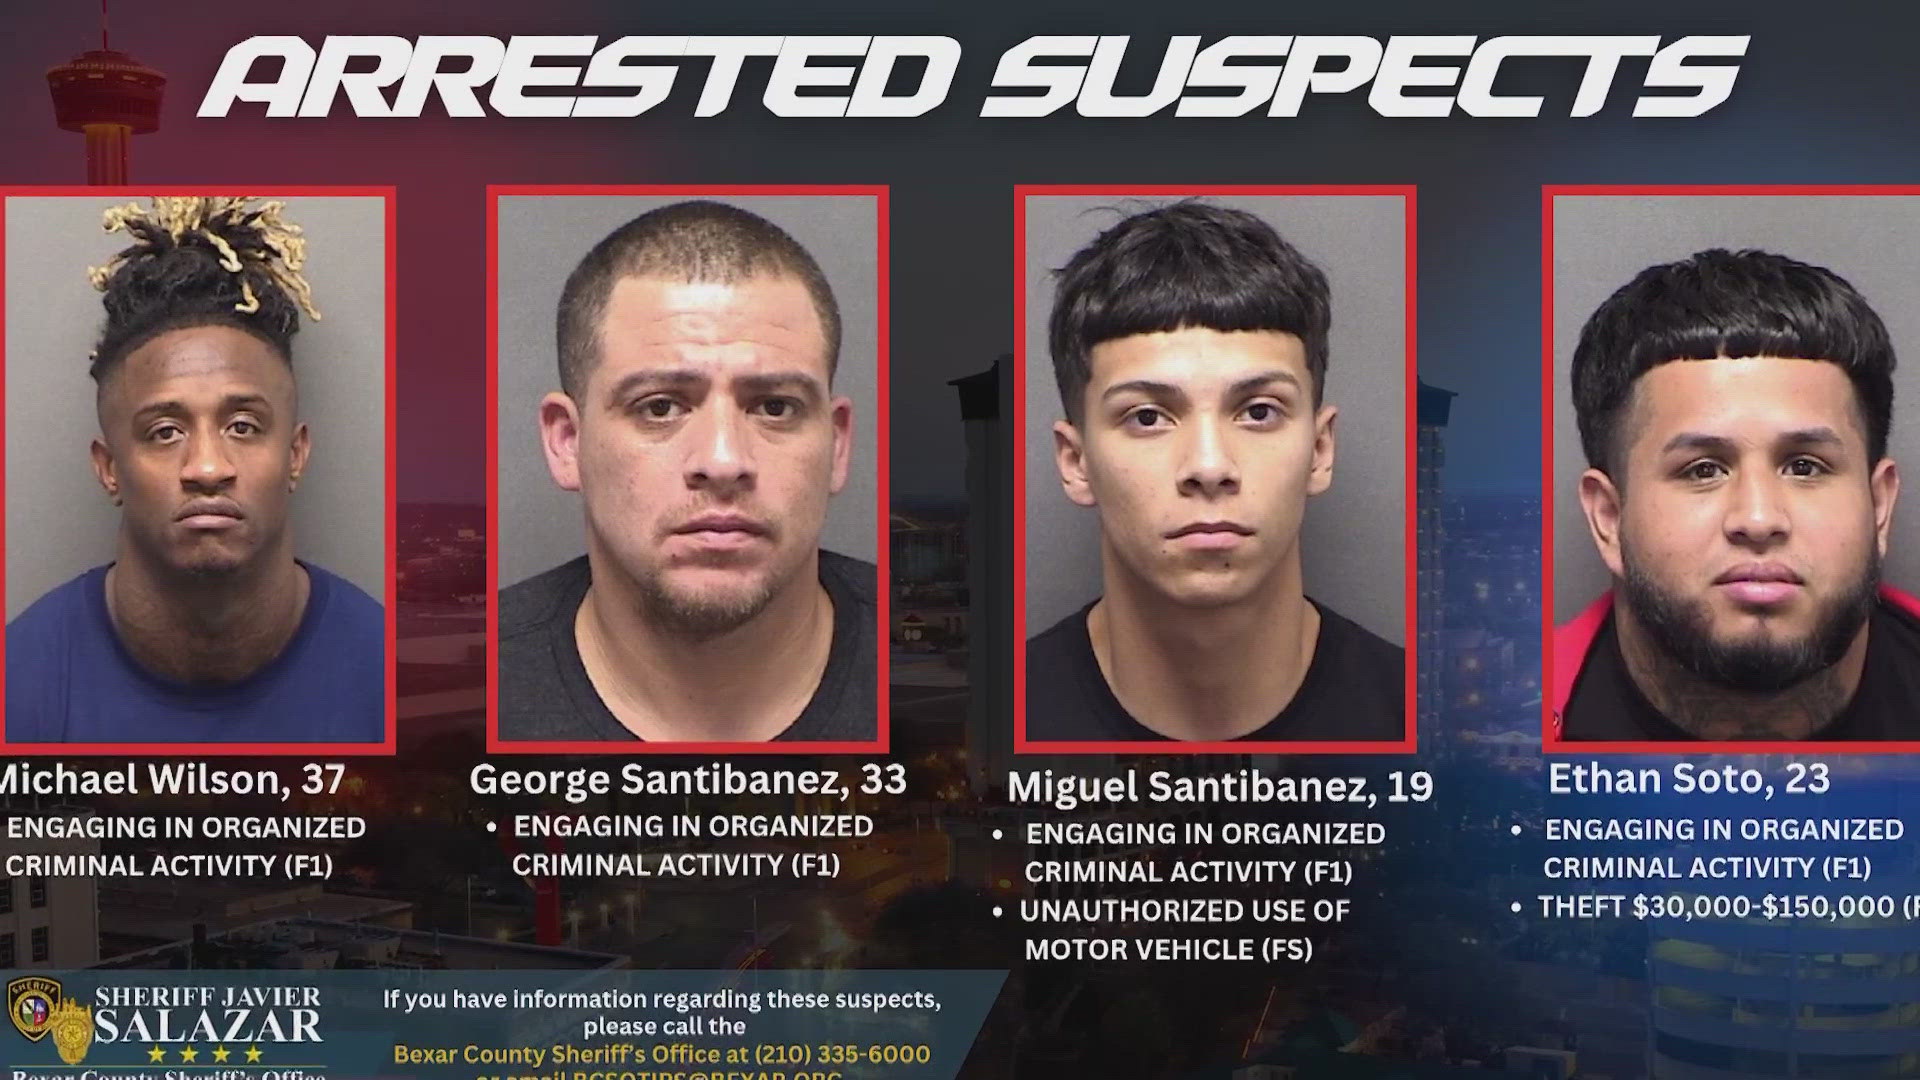 Six men charged for several car thefts across Bexar County